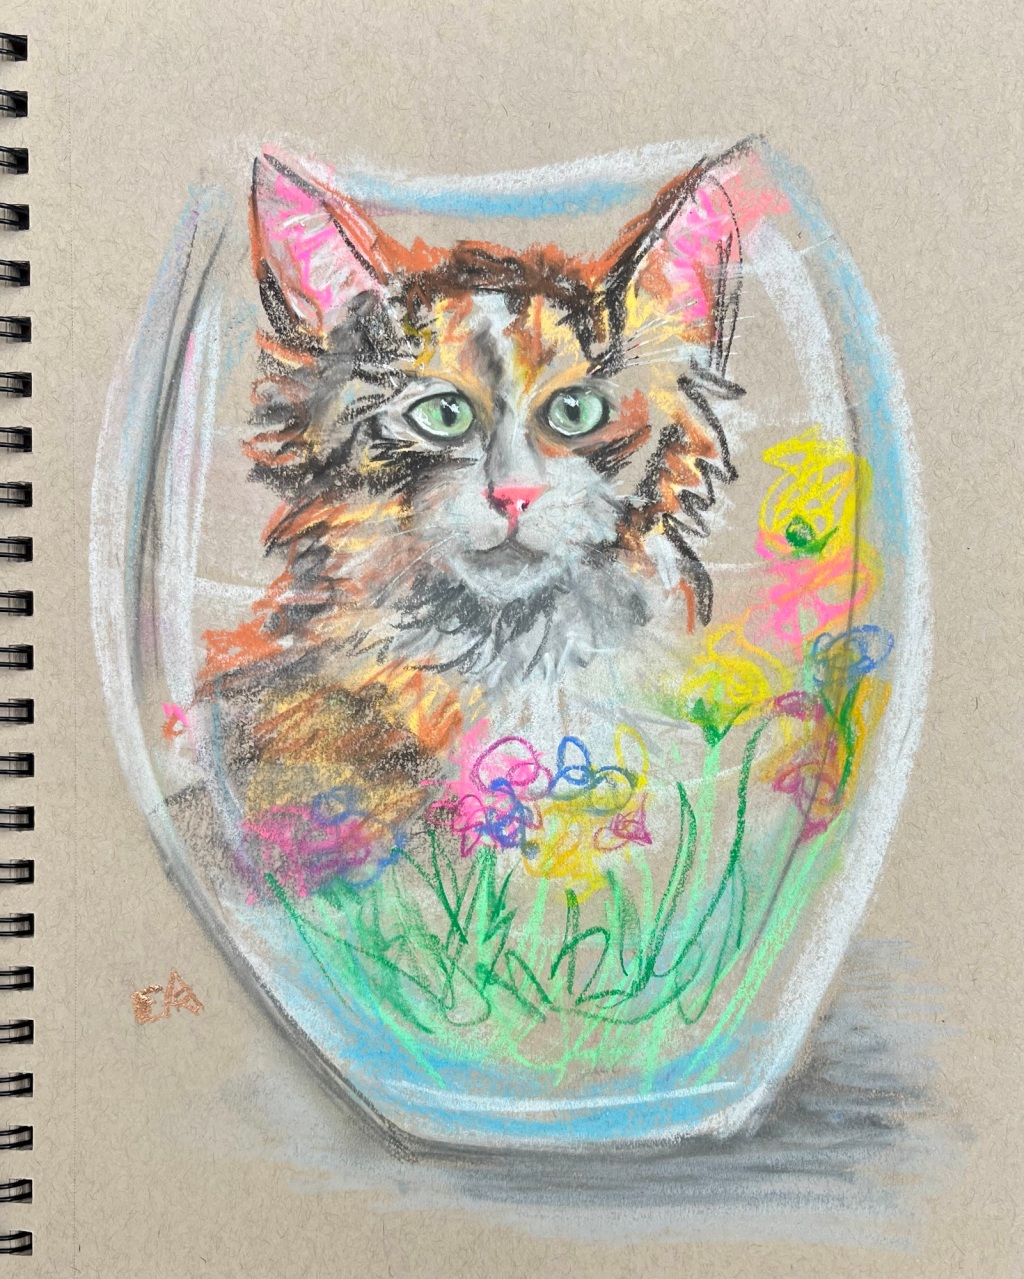 Drawing a Cat Behind a Vase of Flowers